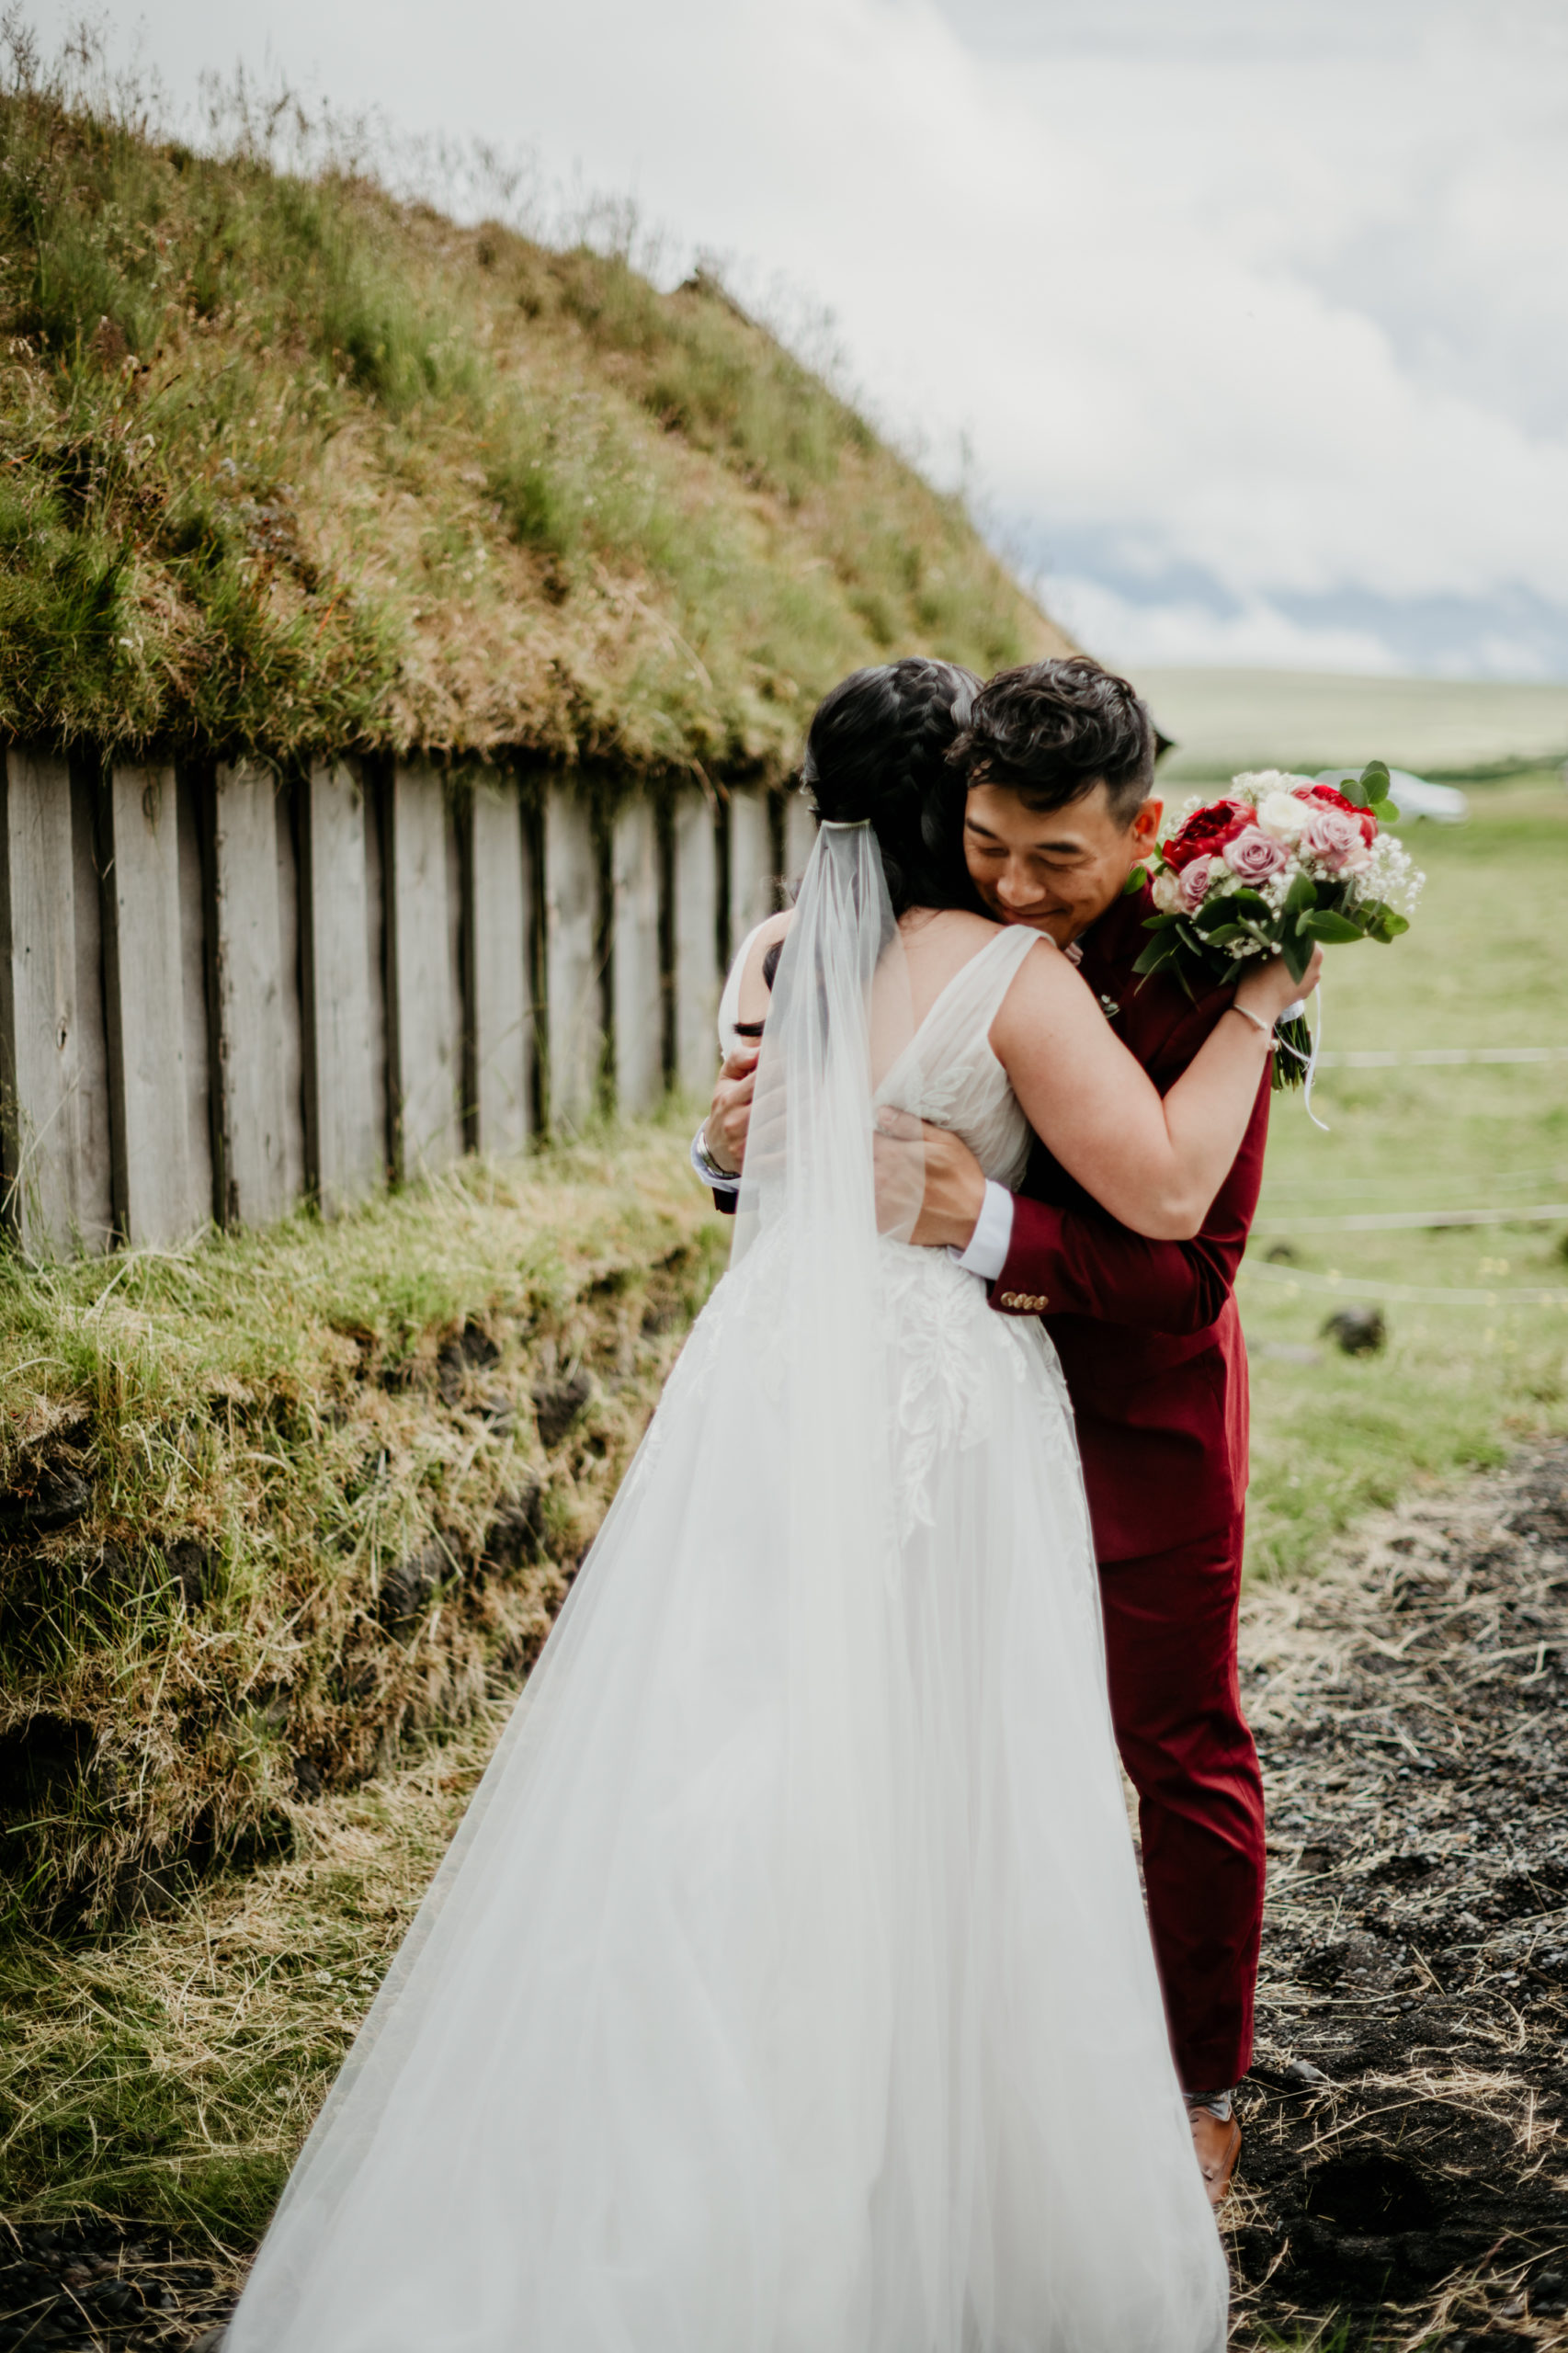 First look elopement photos with Icelandic horses! 

Iceland elopement at Reynisfjara! Iceland is a one of a kind and adventurous elopement location and MUST be explored! If you're wondering how to elope in Iceland, see how these two did it! 